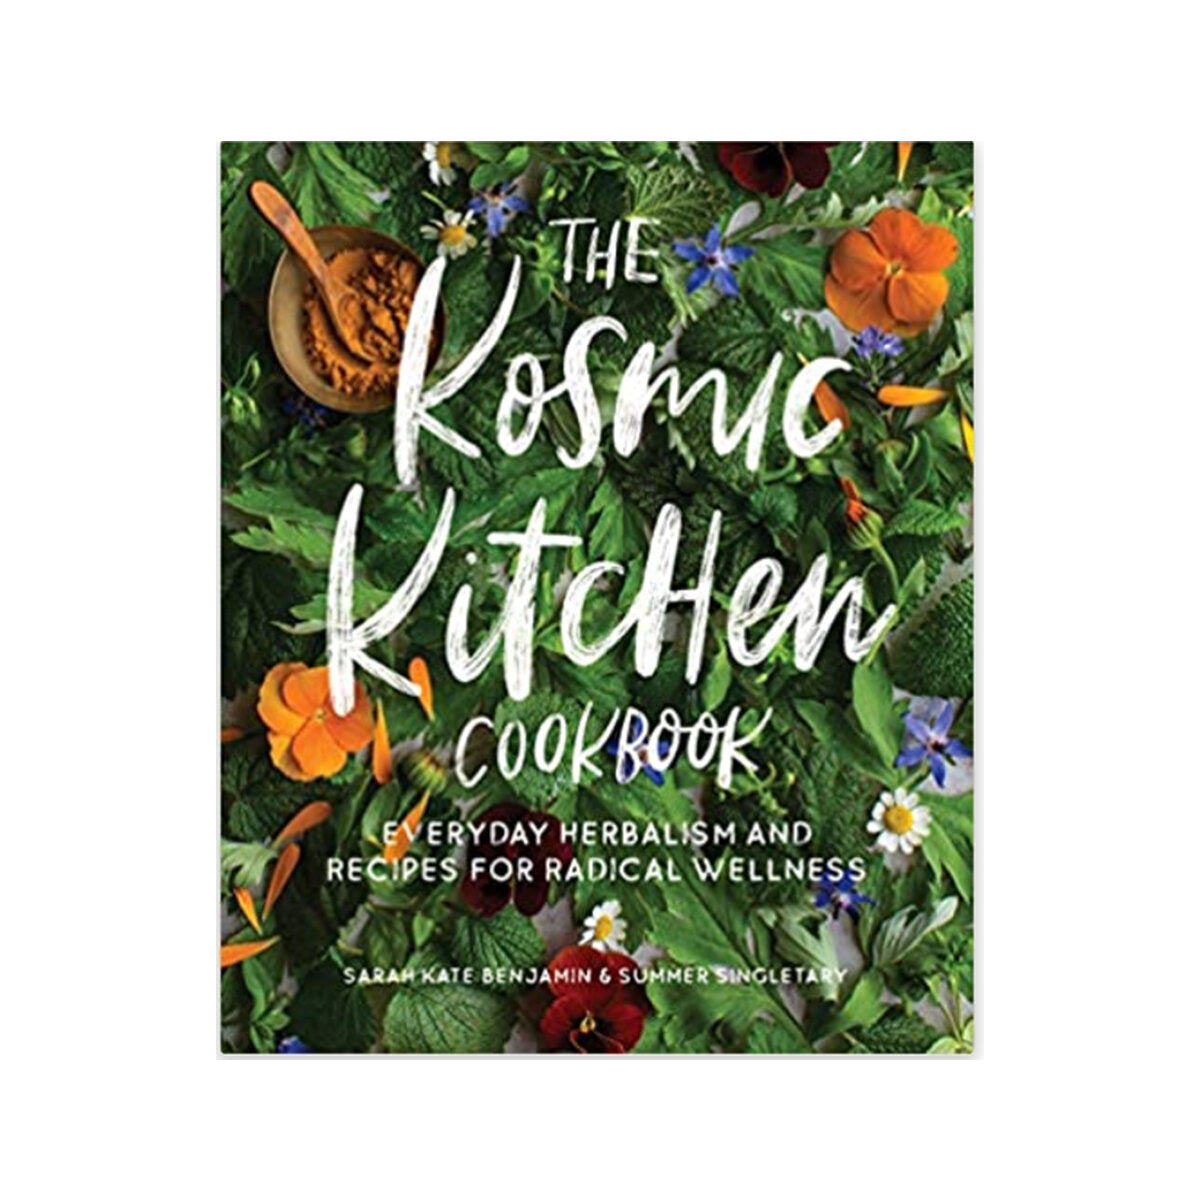 Kosmic Kitchen Cookbook Everyday Herbalism and Recipes for Radical Wellness